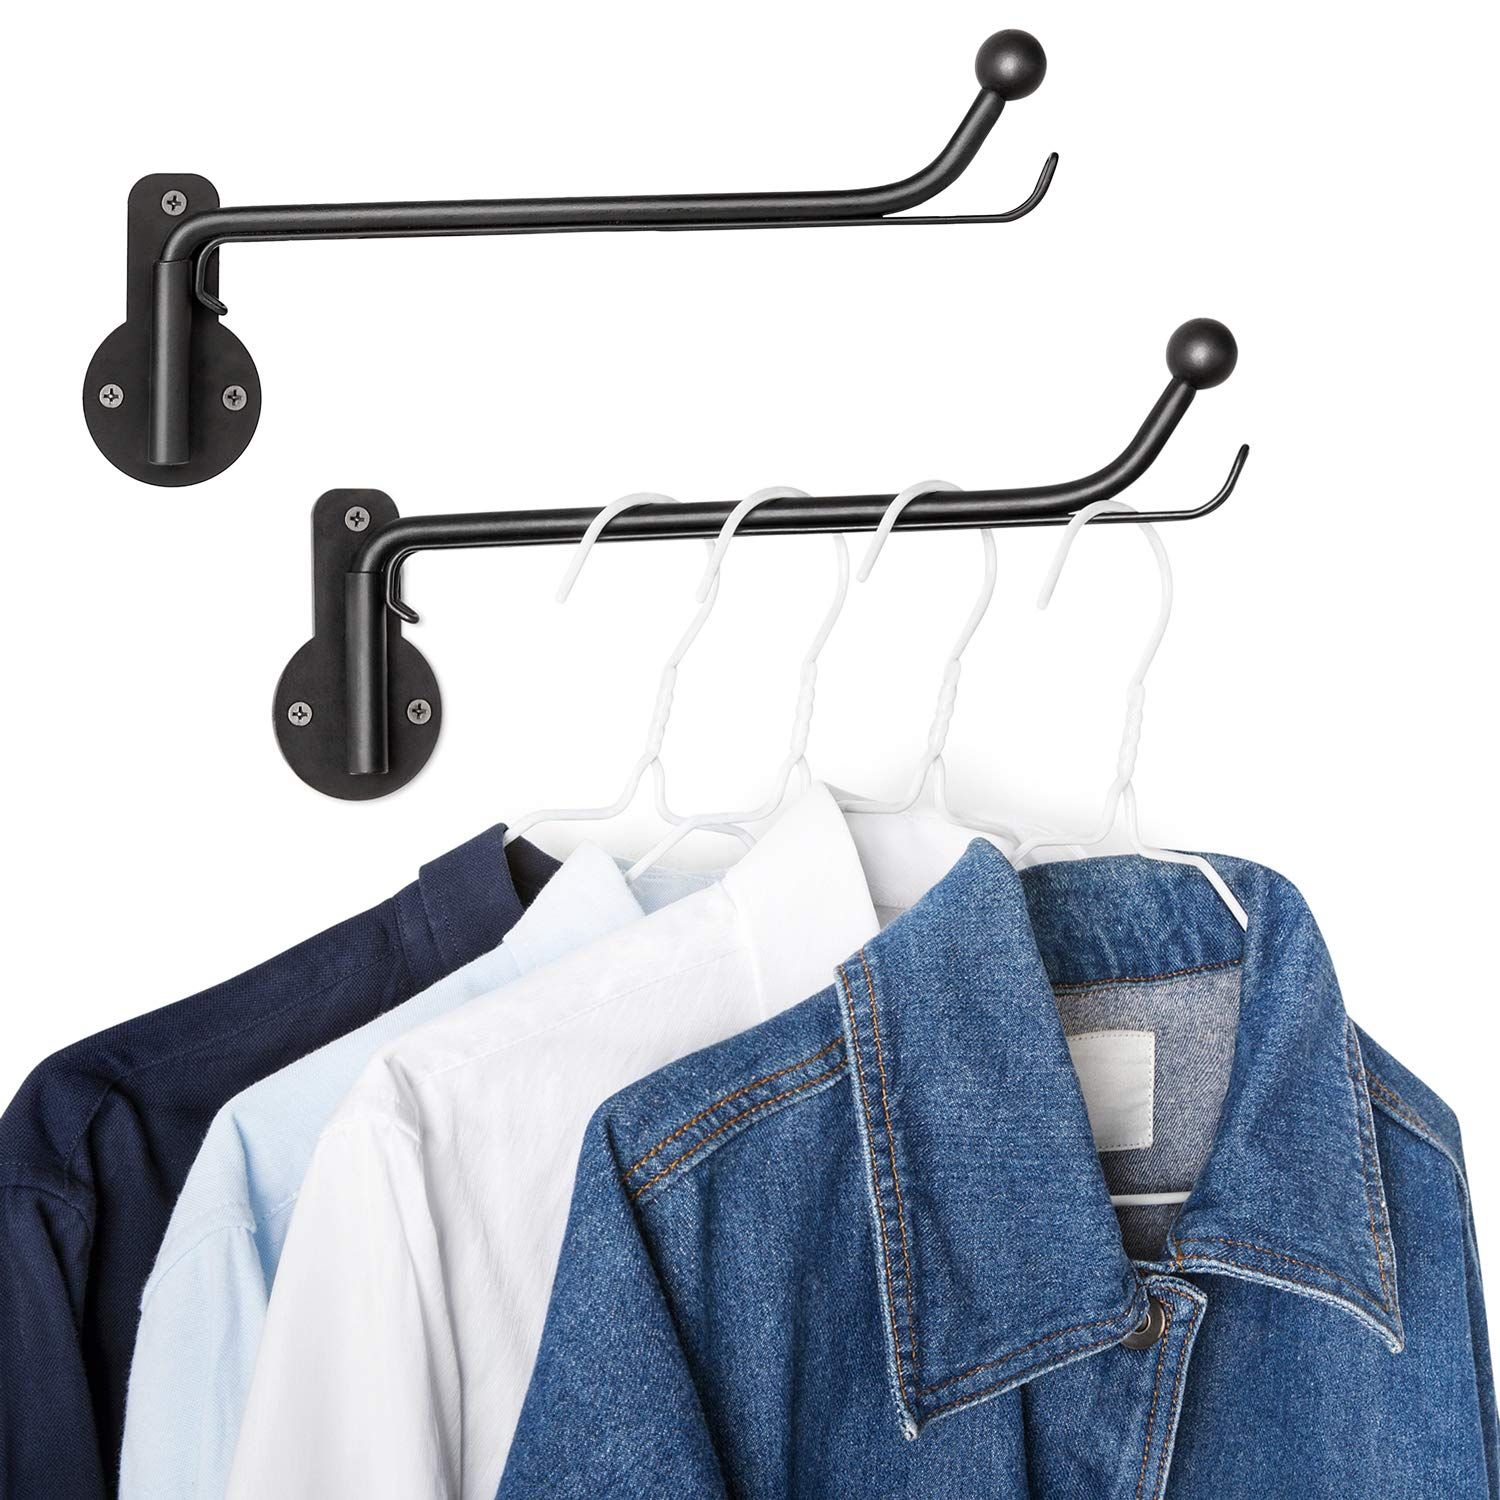 Mkono Wall Mounted Clothes Hanger with Swing Arm Holder Valet Hook Metal Hanging Drying Rack Space S | Amazon (US)